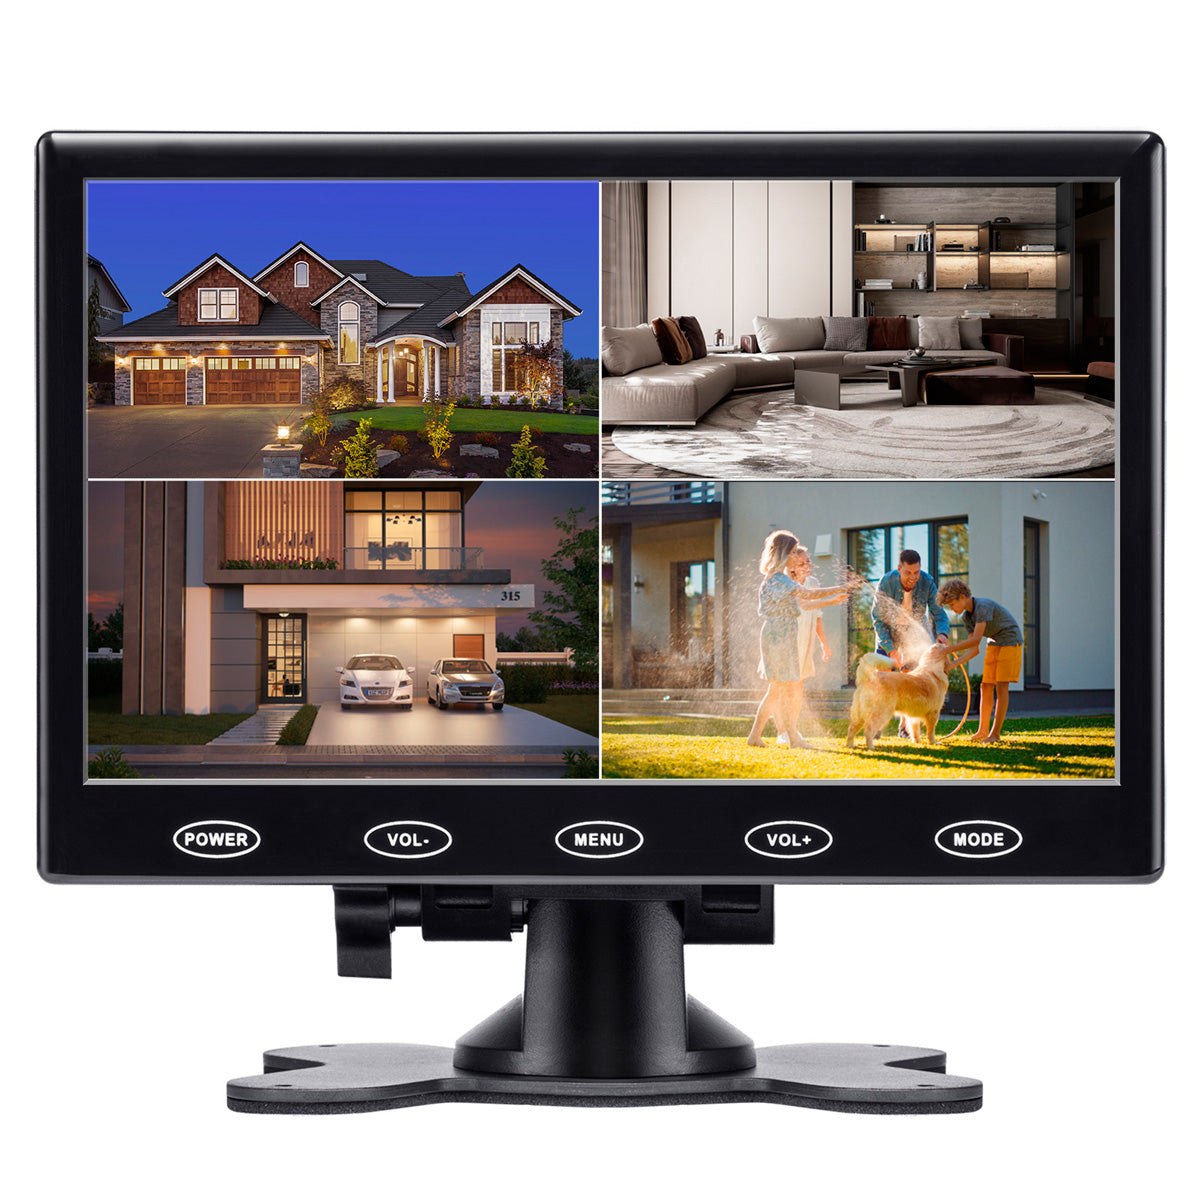 Campark D701 7" 800*480 Security Monitor, Support VGA/AV/HDMI/USB Interface Displays (Only available in the US)